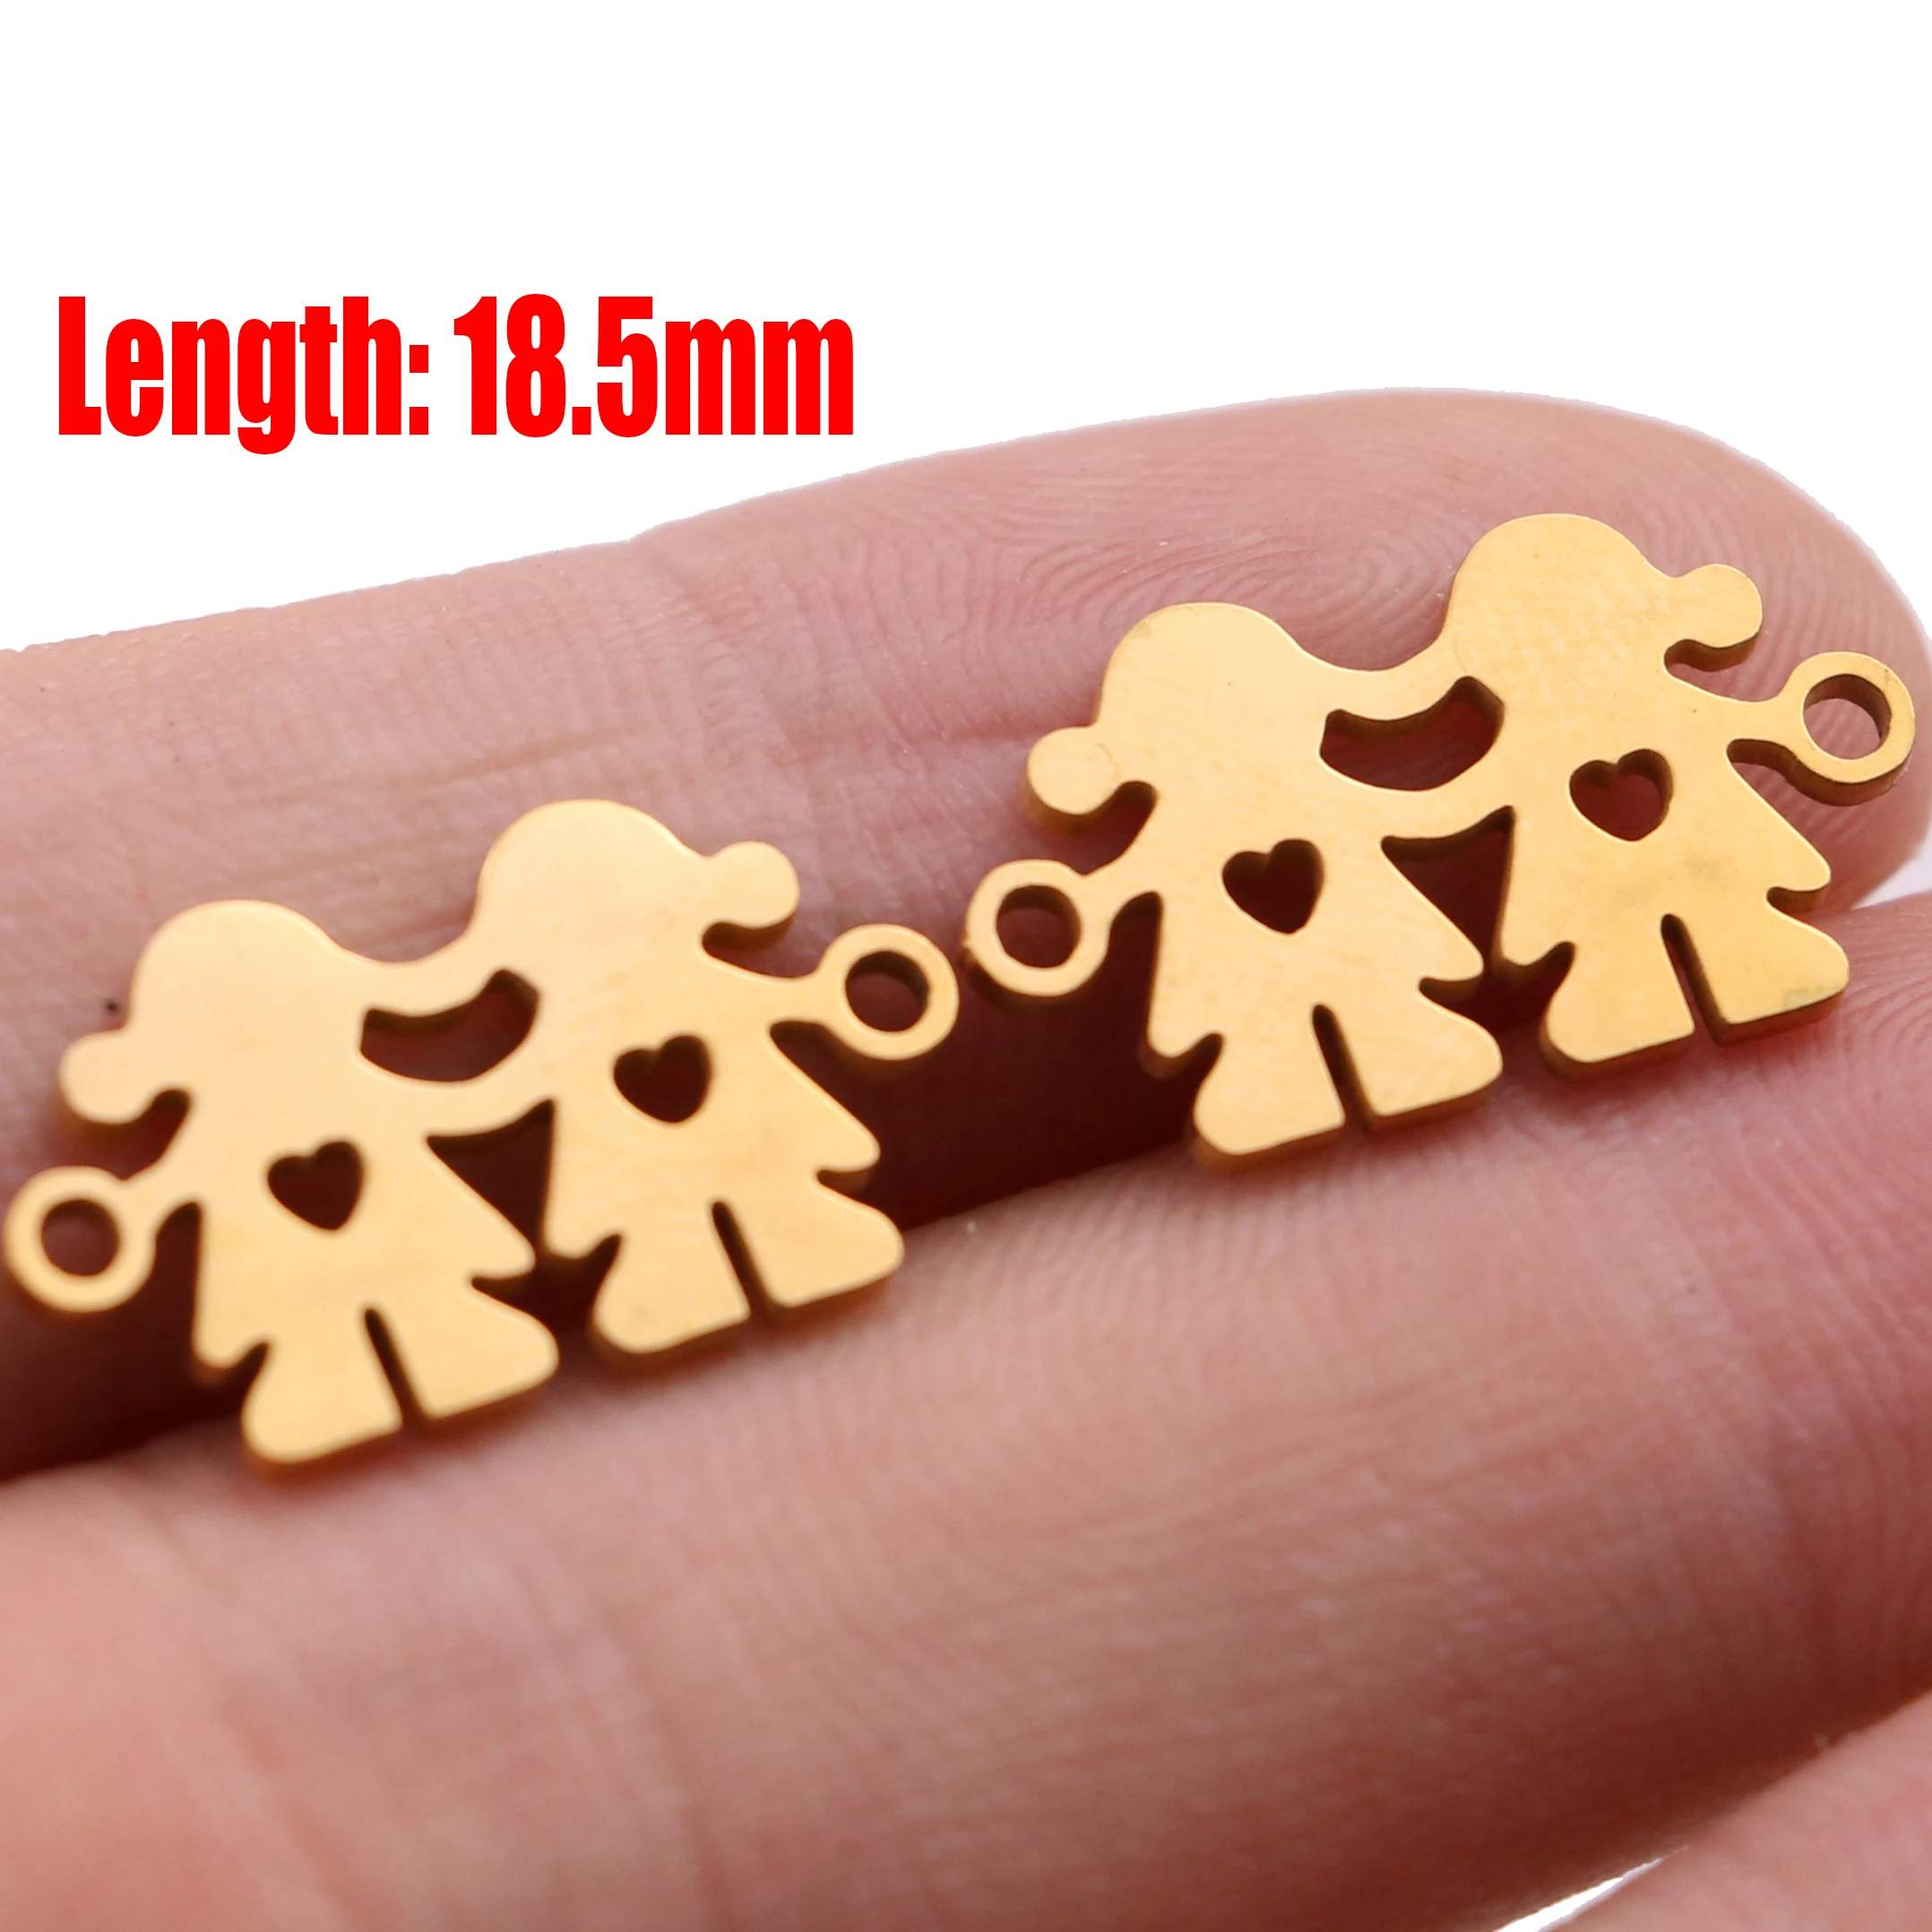 5pcs Family Chain Stainless Steel Pendant Necklace Parents and Children Necklaces Gold/steel Jewelry Gift for Mom Dad New Twice - Цвет: Gold 25